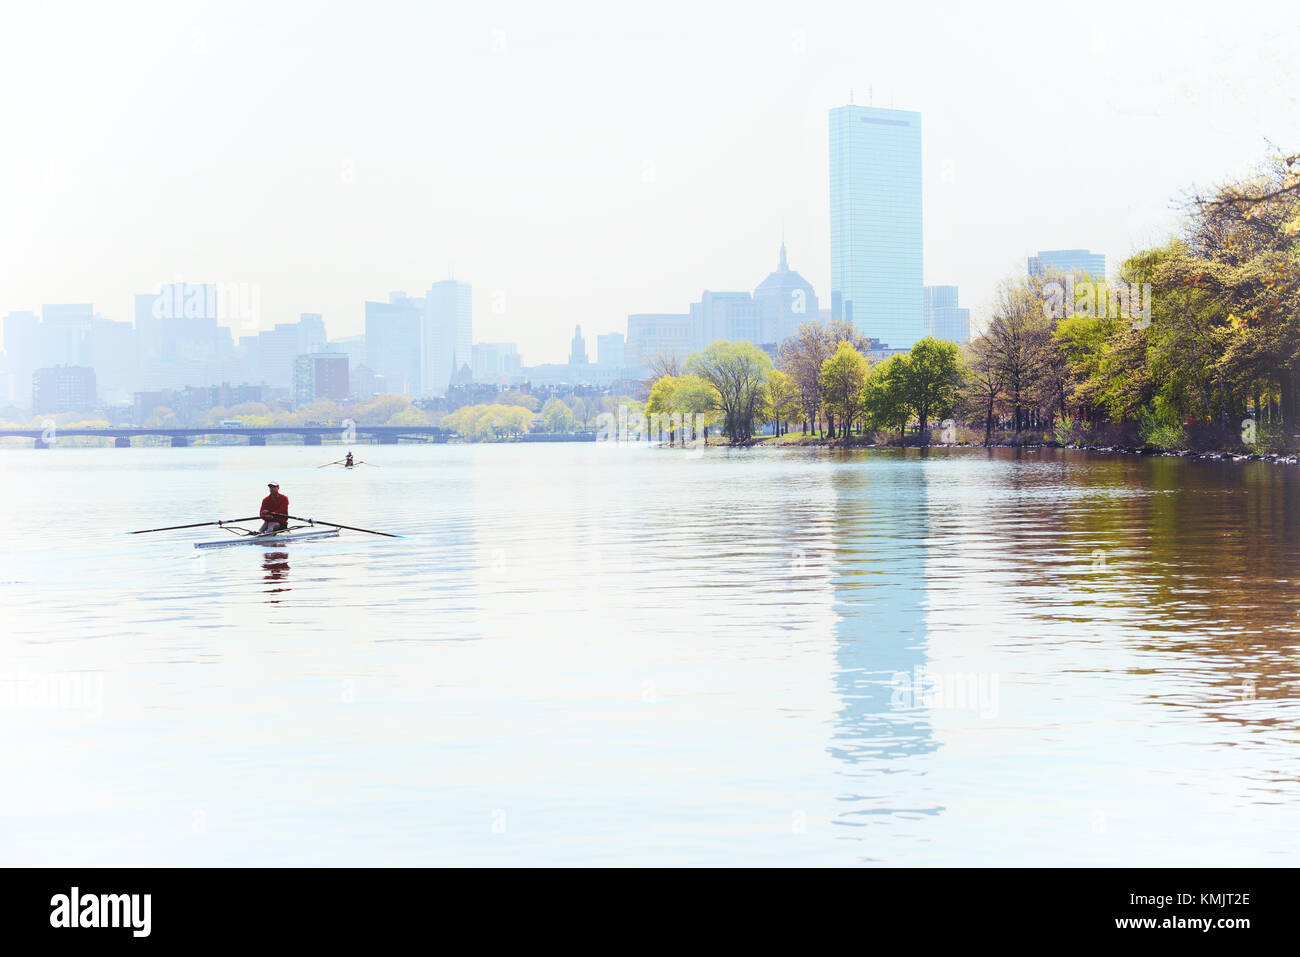 Foggy morning in Boston. People rowing in Charles River, city skyline in the background. Stock Photo